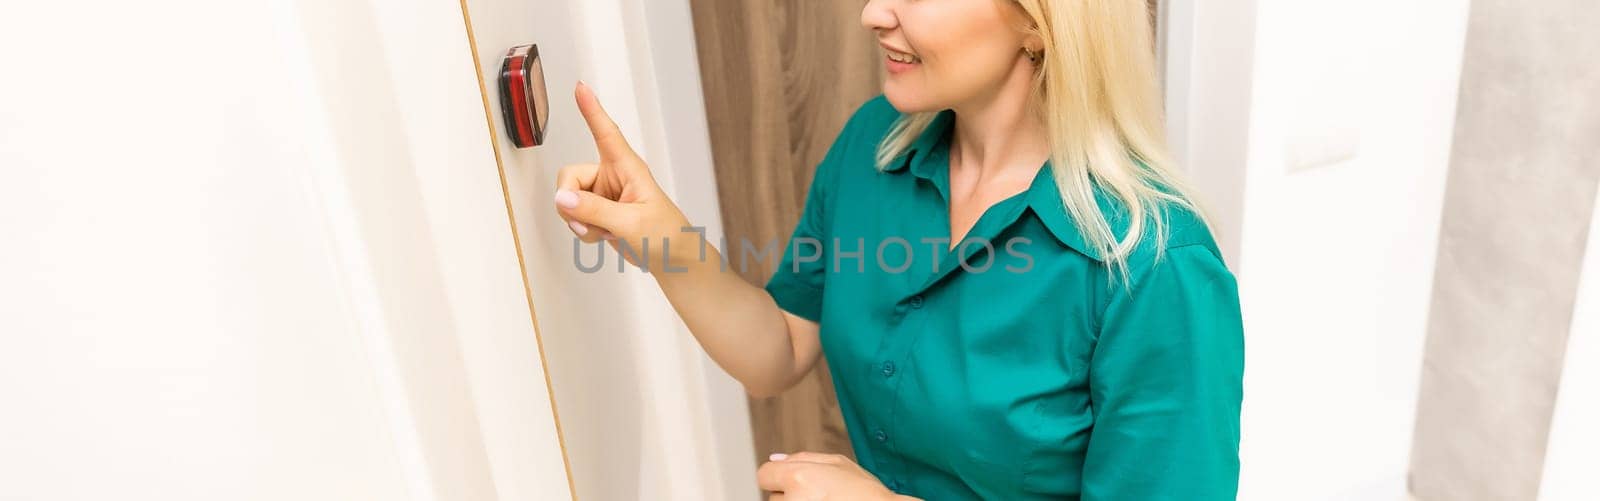 A woman is pressing the up button of a wall attached house thermostat with digital display showing the temperature. A concept image for electricity bill, heating, cooling, eco friendly, saving etc by Andelov13